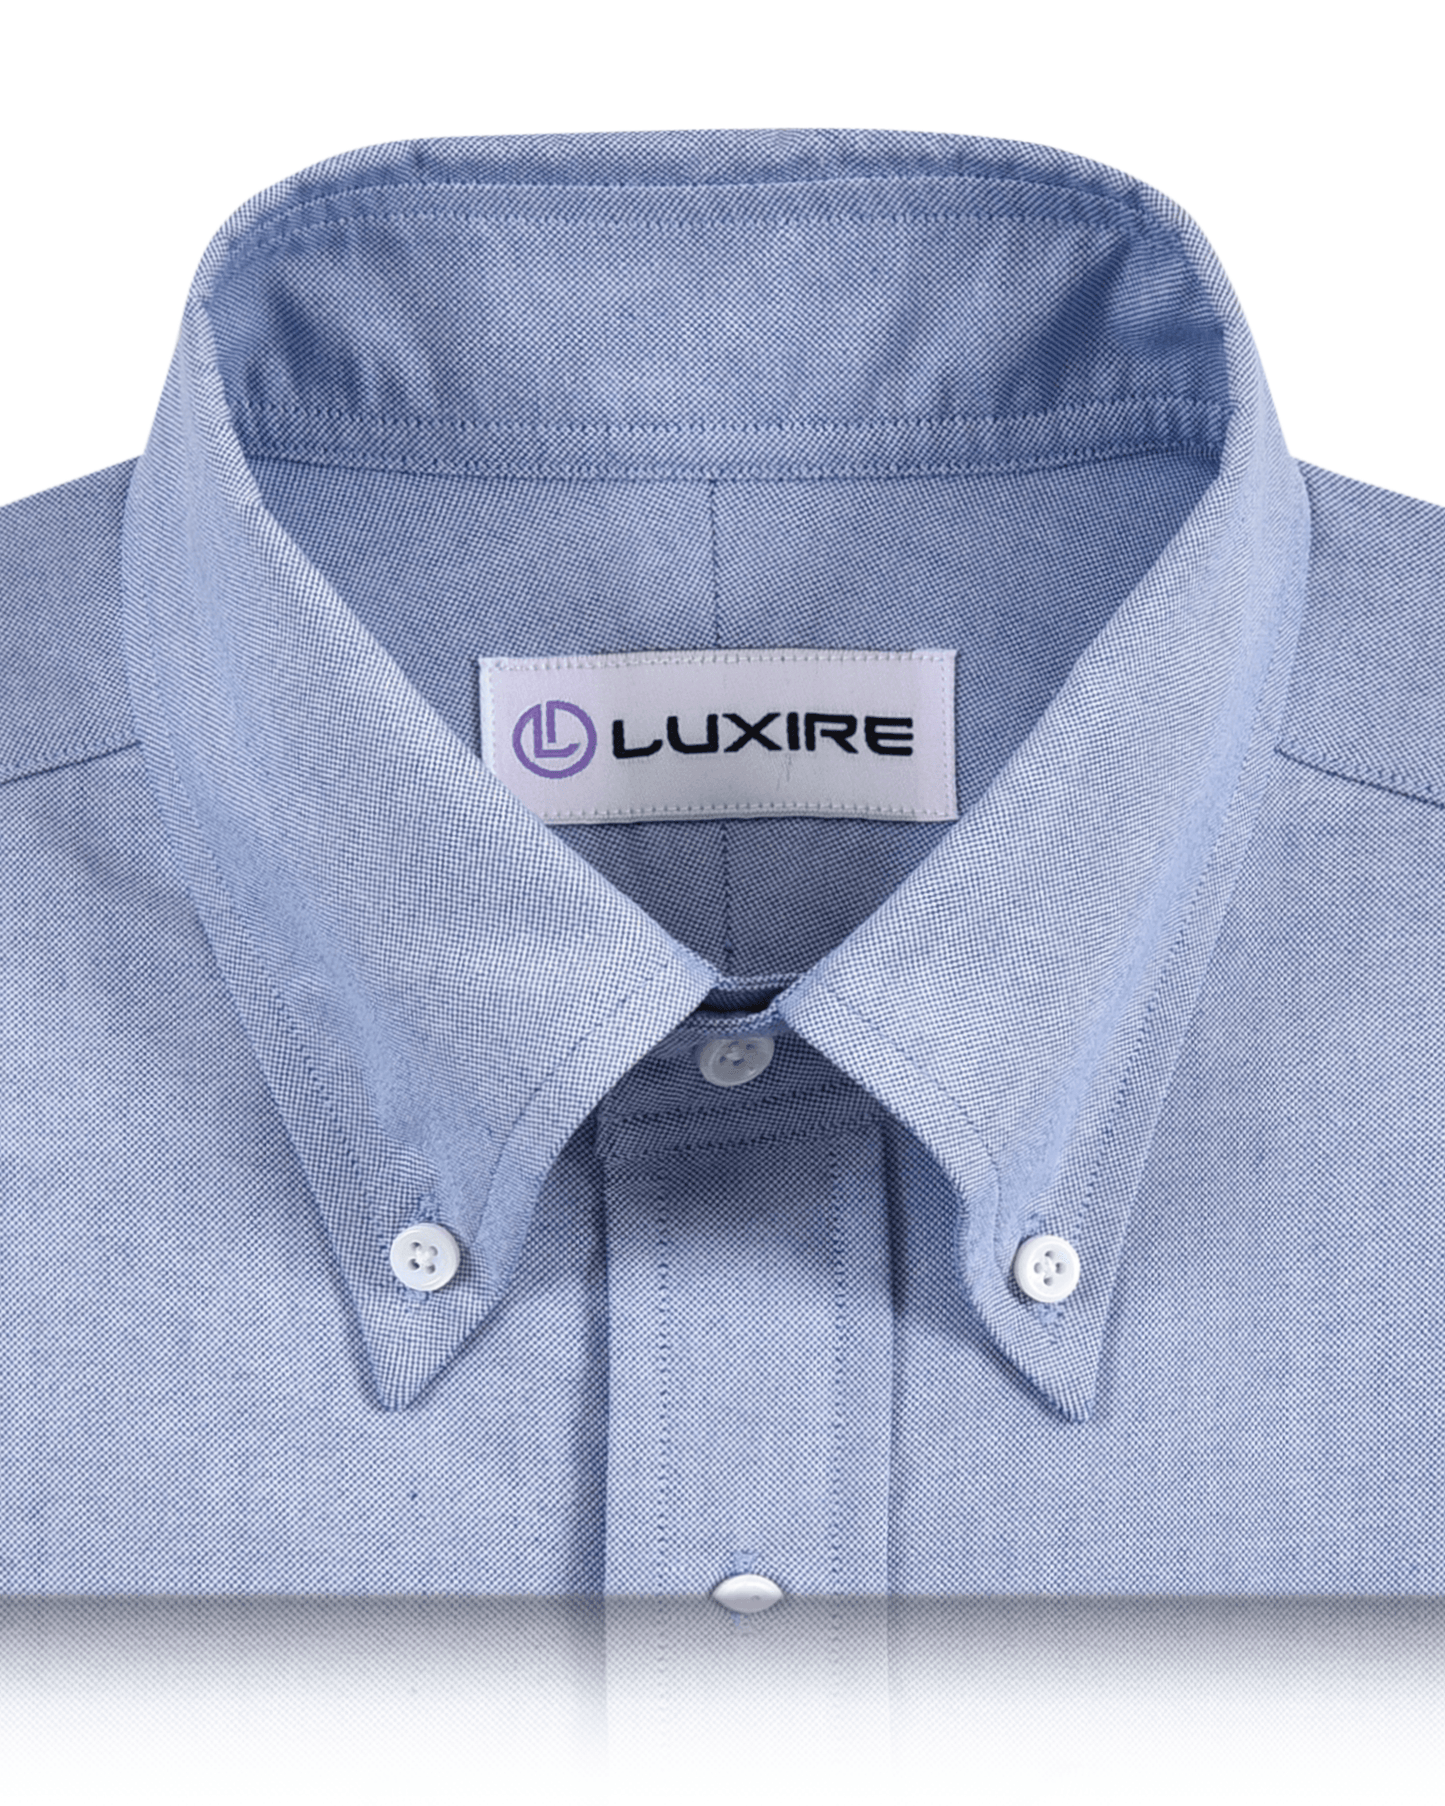 Collar of the custom oxford dress shirt for men by Luxire in classic blue